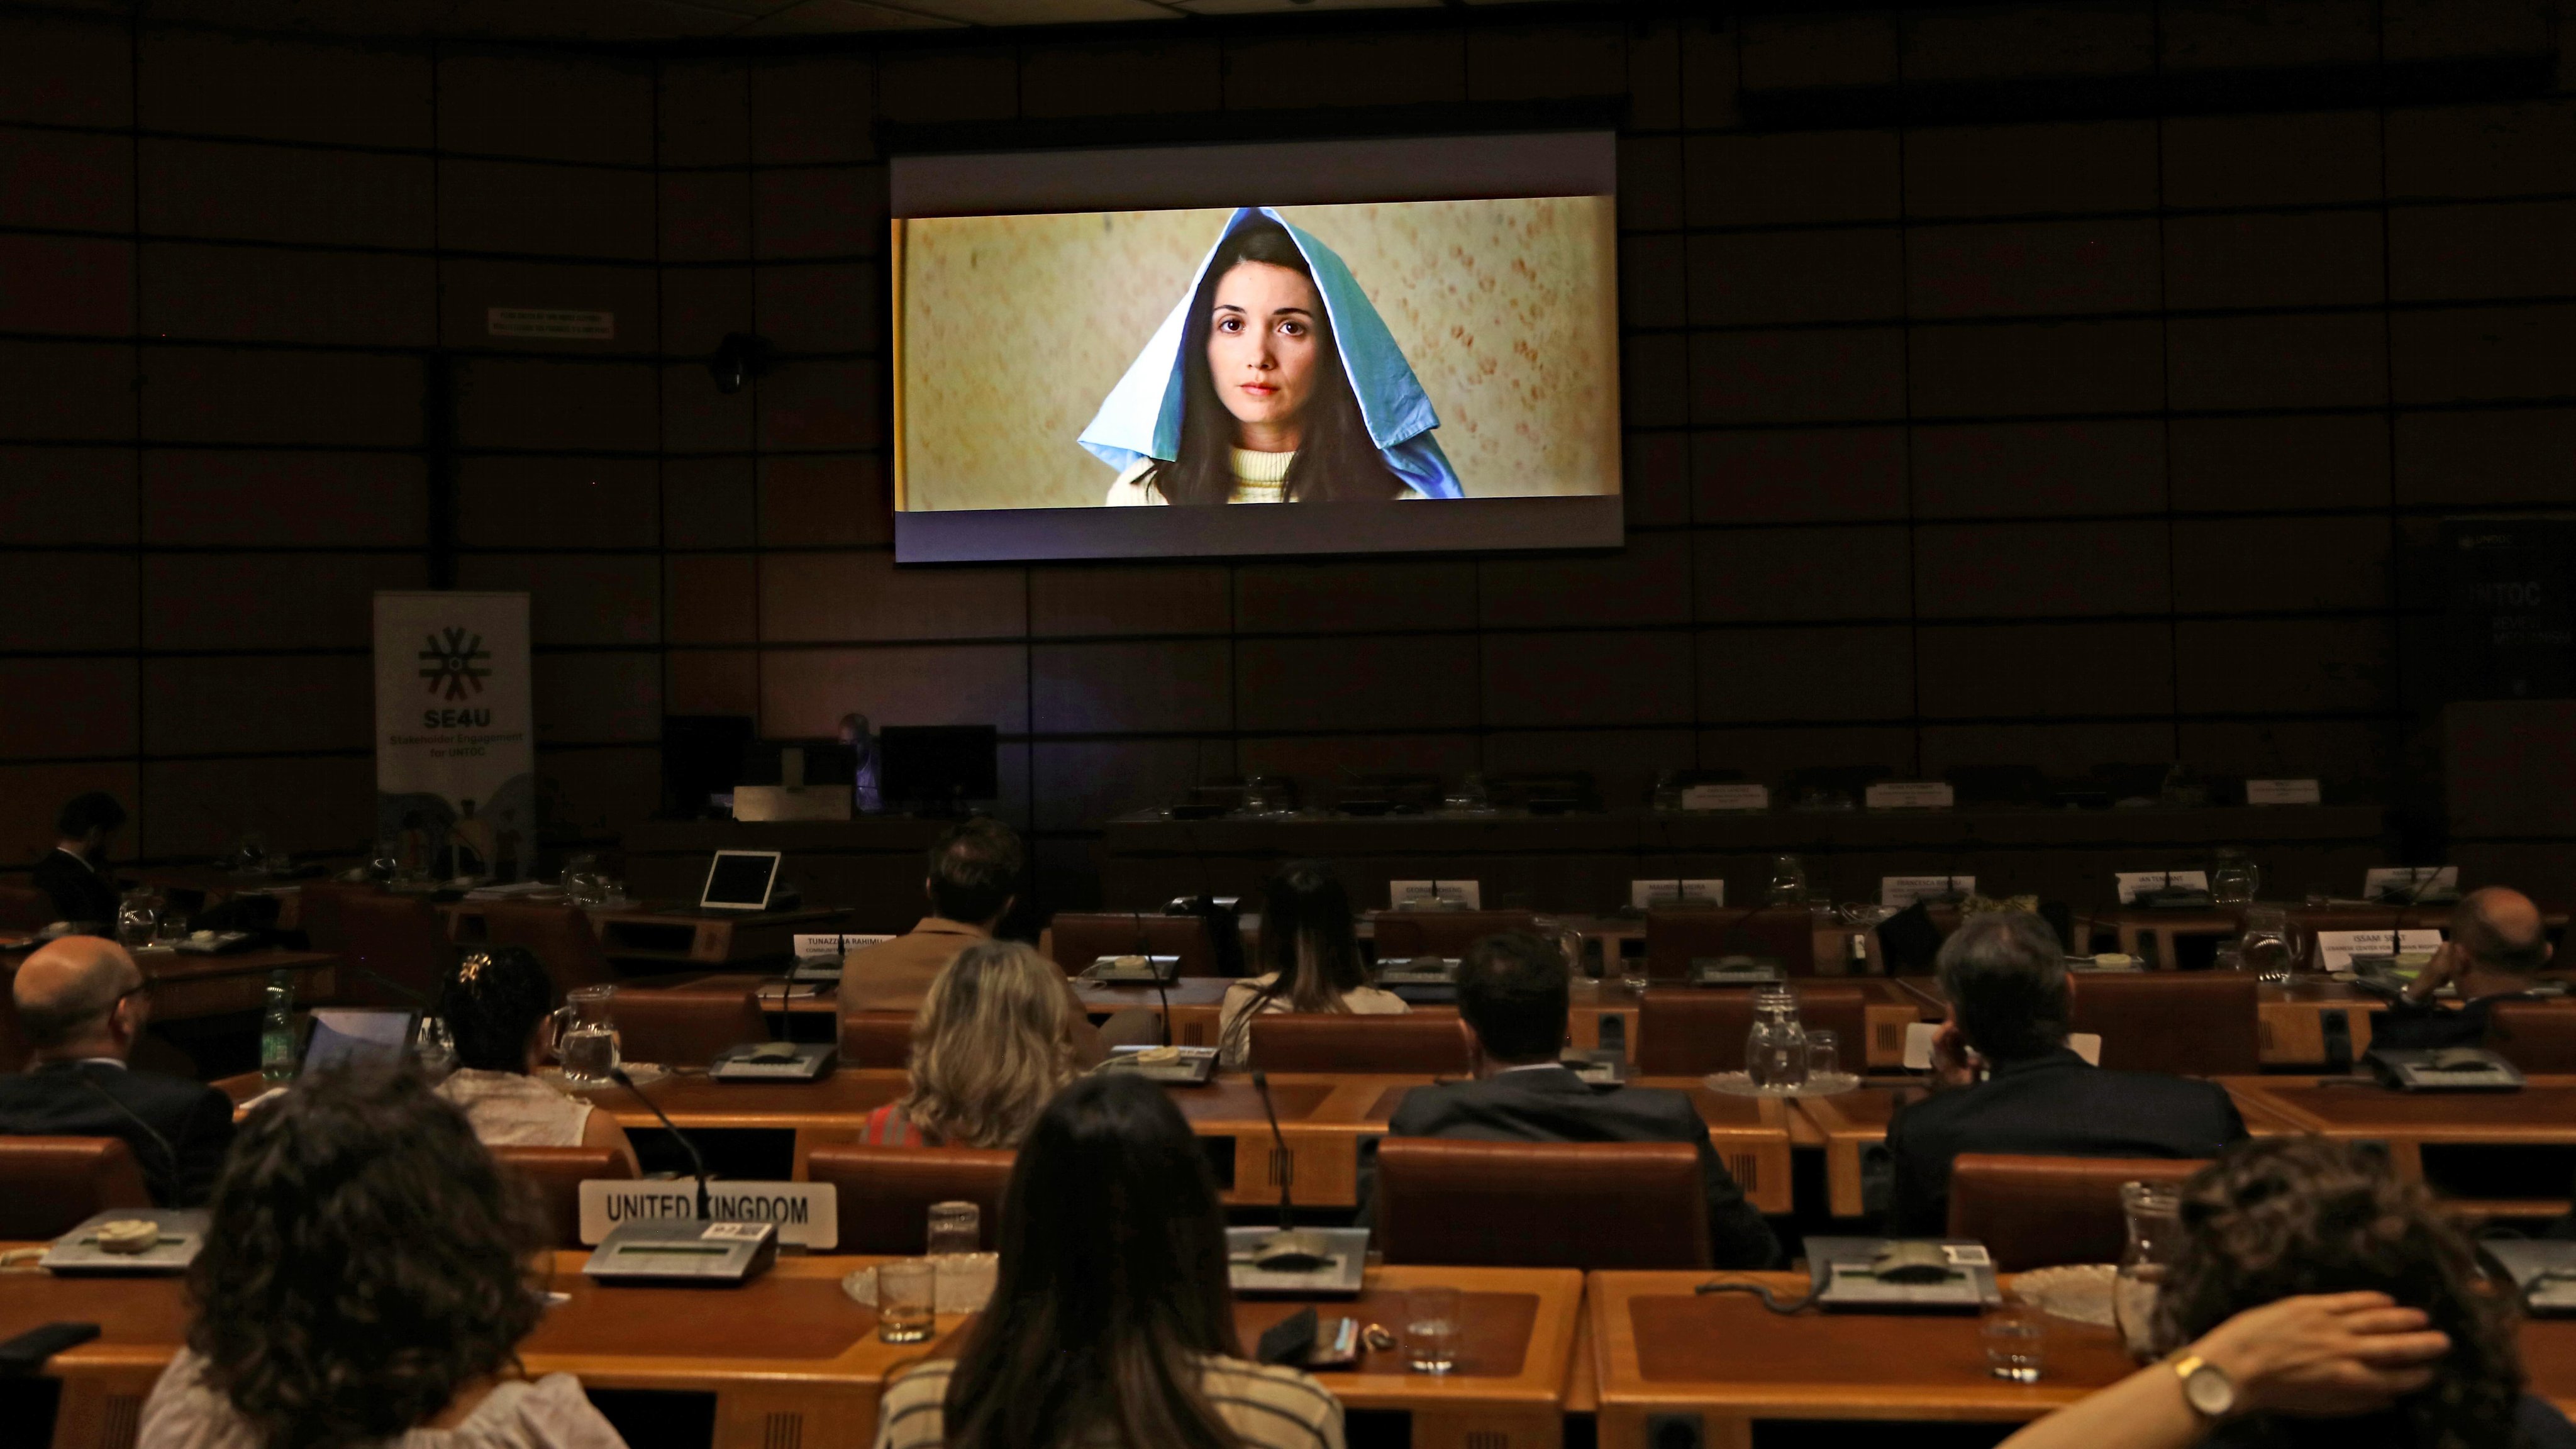 A projector screen displays an image from a film. Participants of a film screening are sitting behind tables.